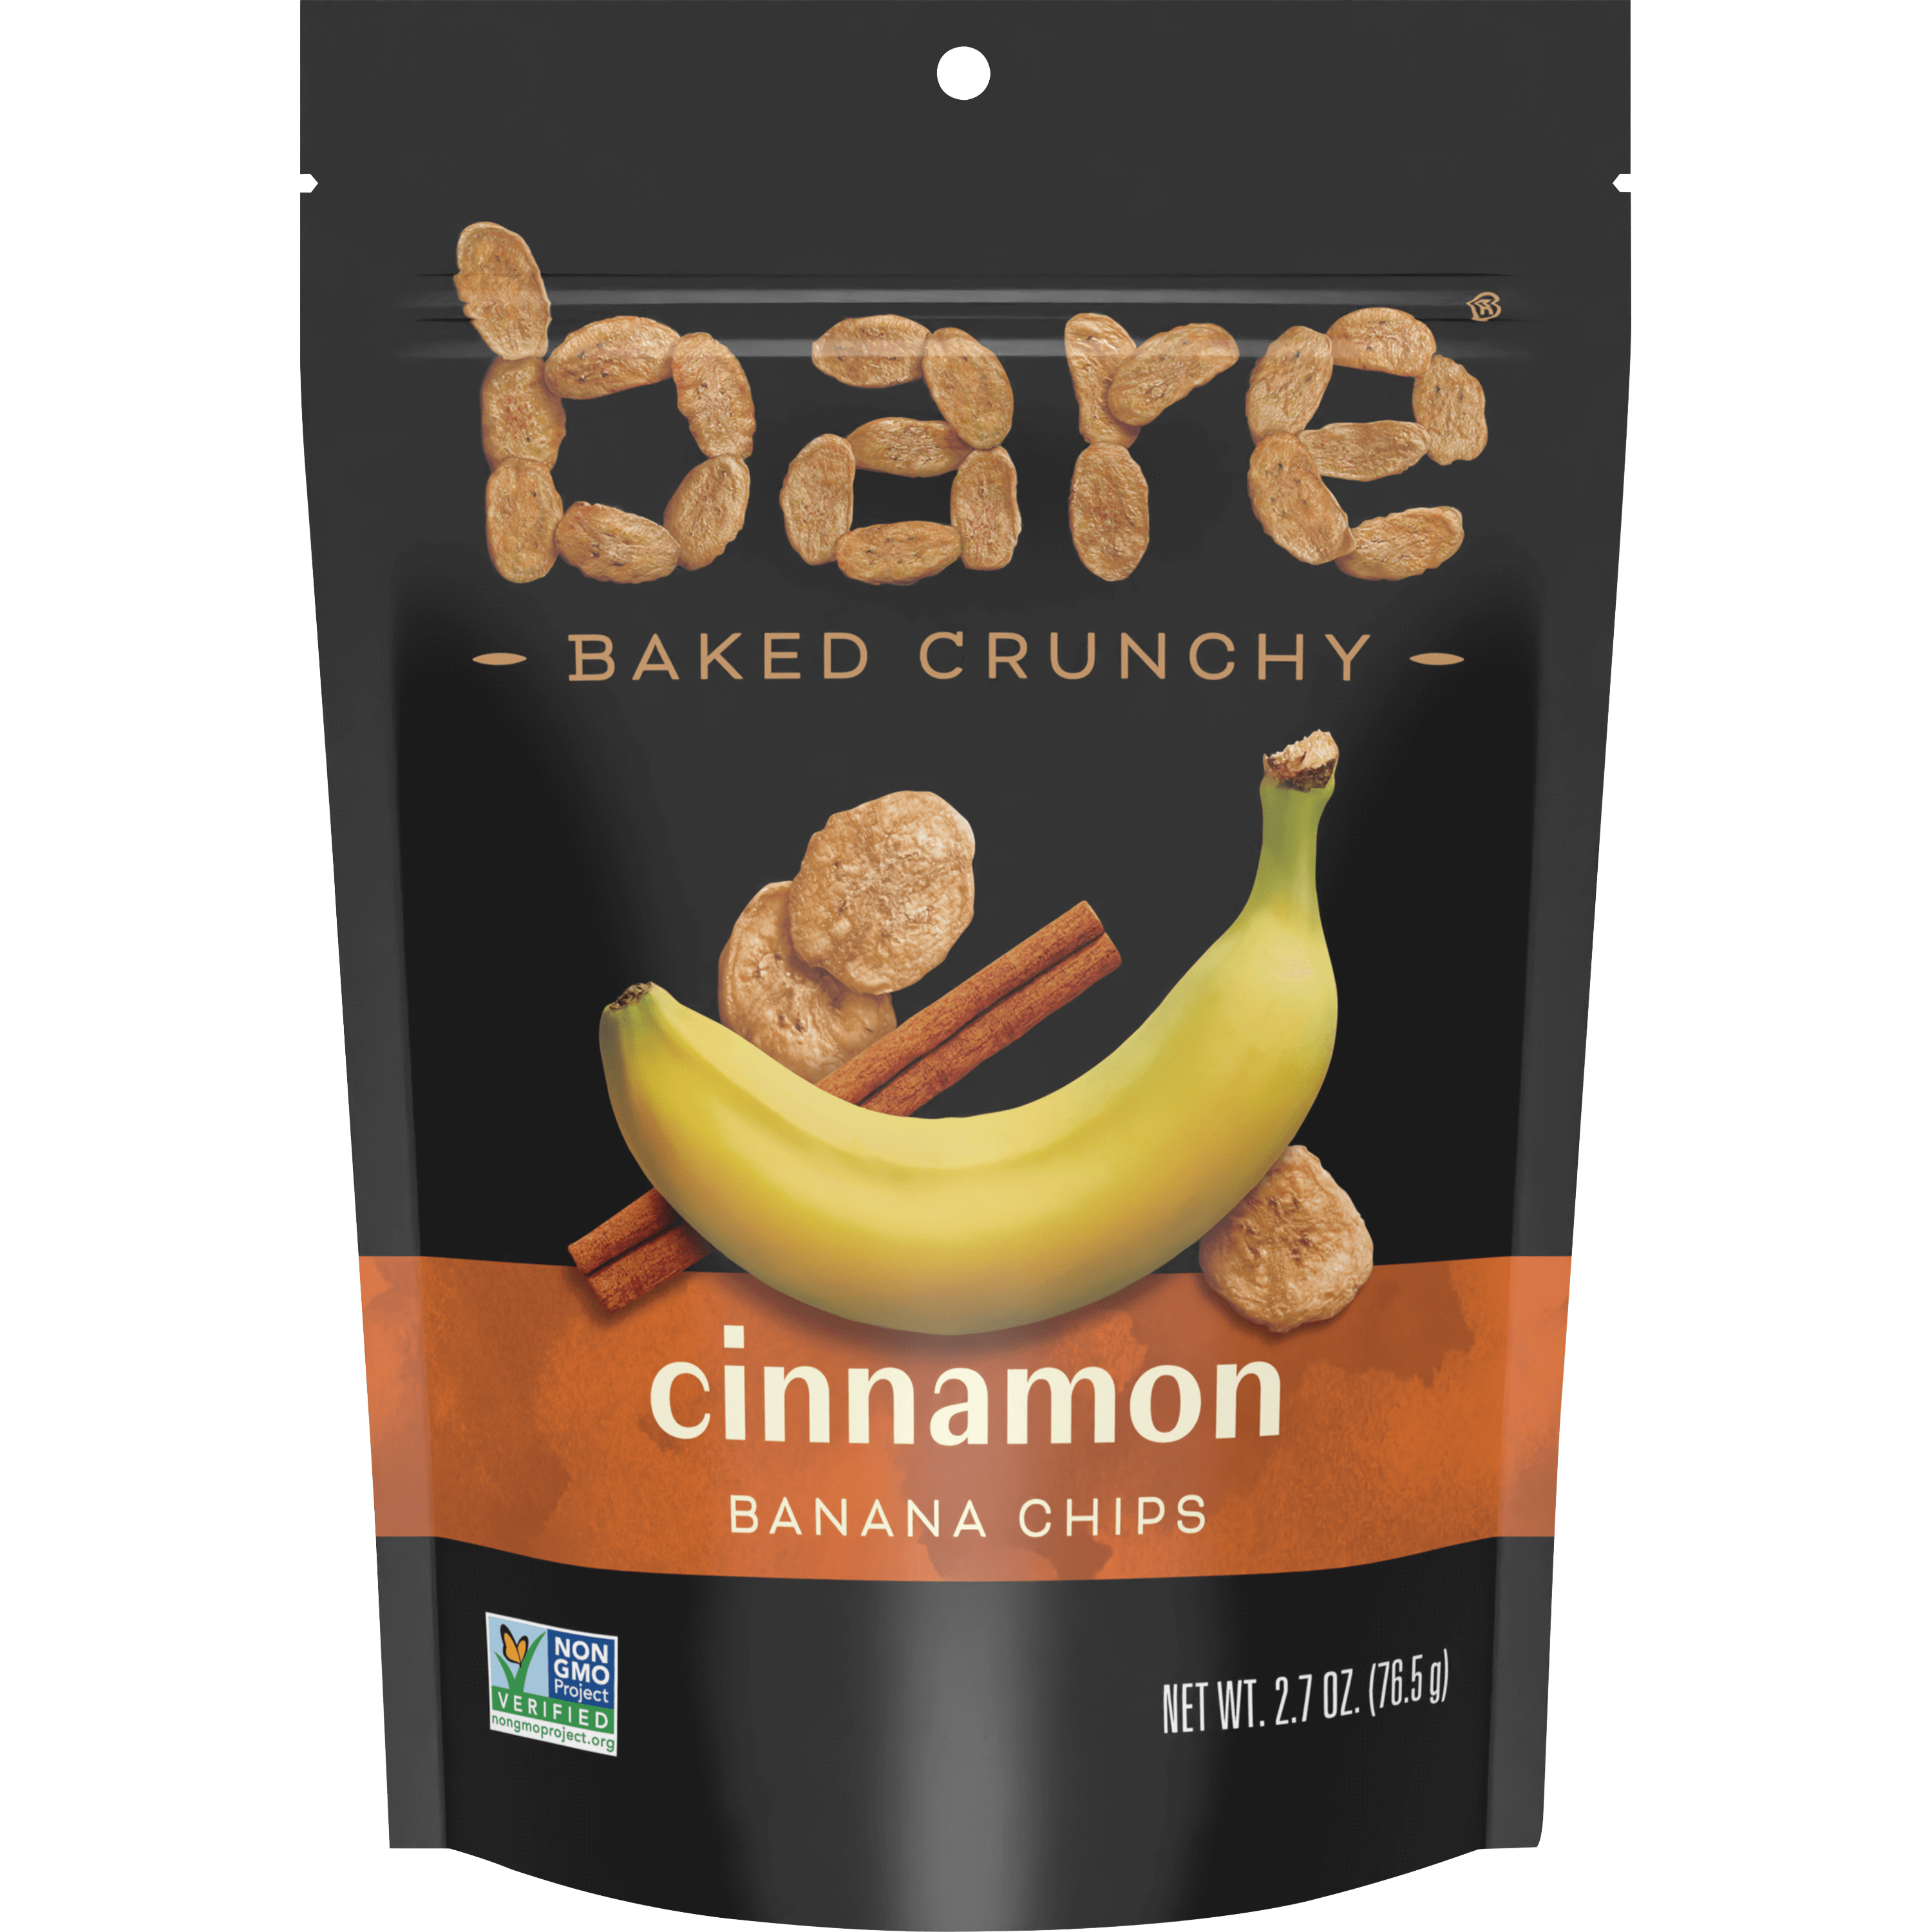 Bare Snacks - Advertising Campaign